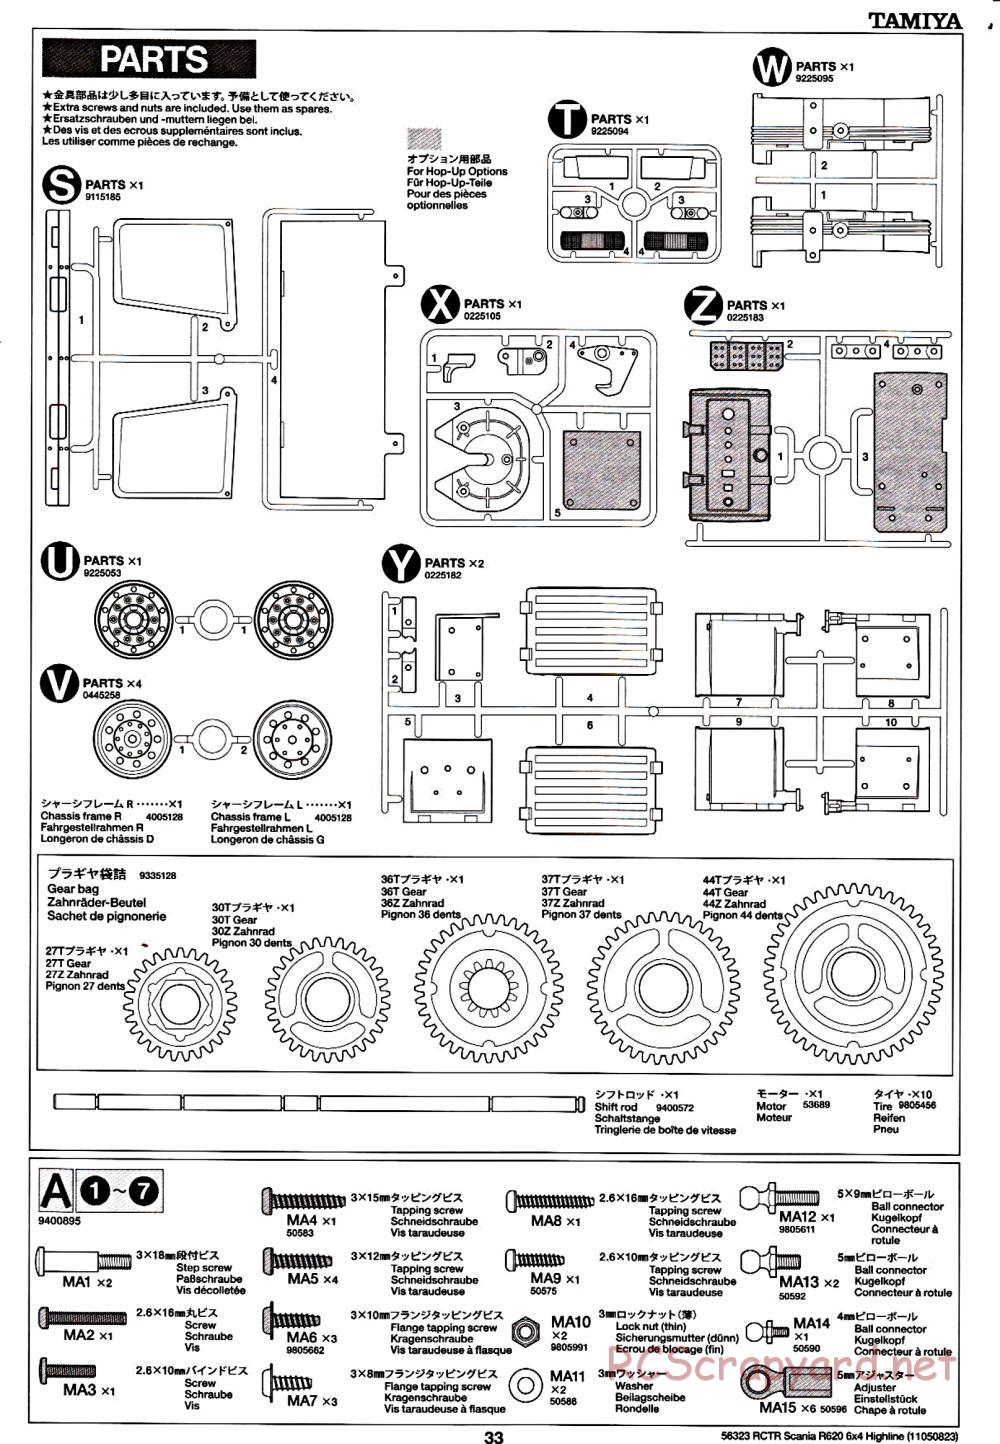 Tamiya - Scania R620 6x4 Highline Tractor Truck Chassis - Manual - Page 33